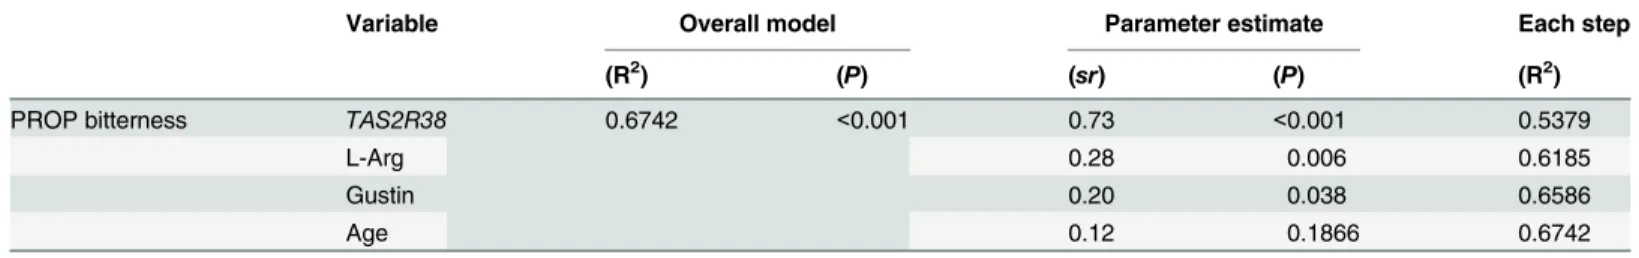 Table 2. Multiple regression model for PROP Bitterness (3.2 mM).